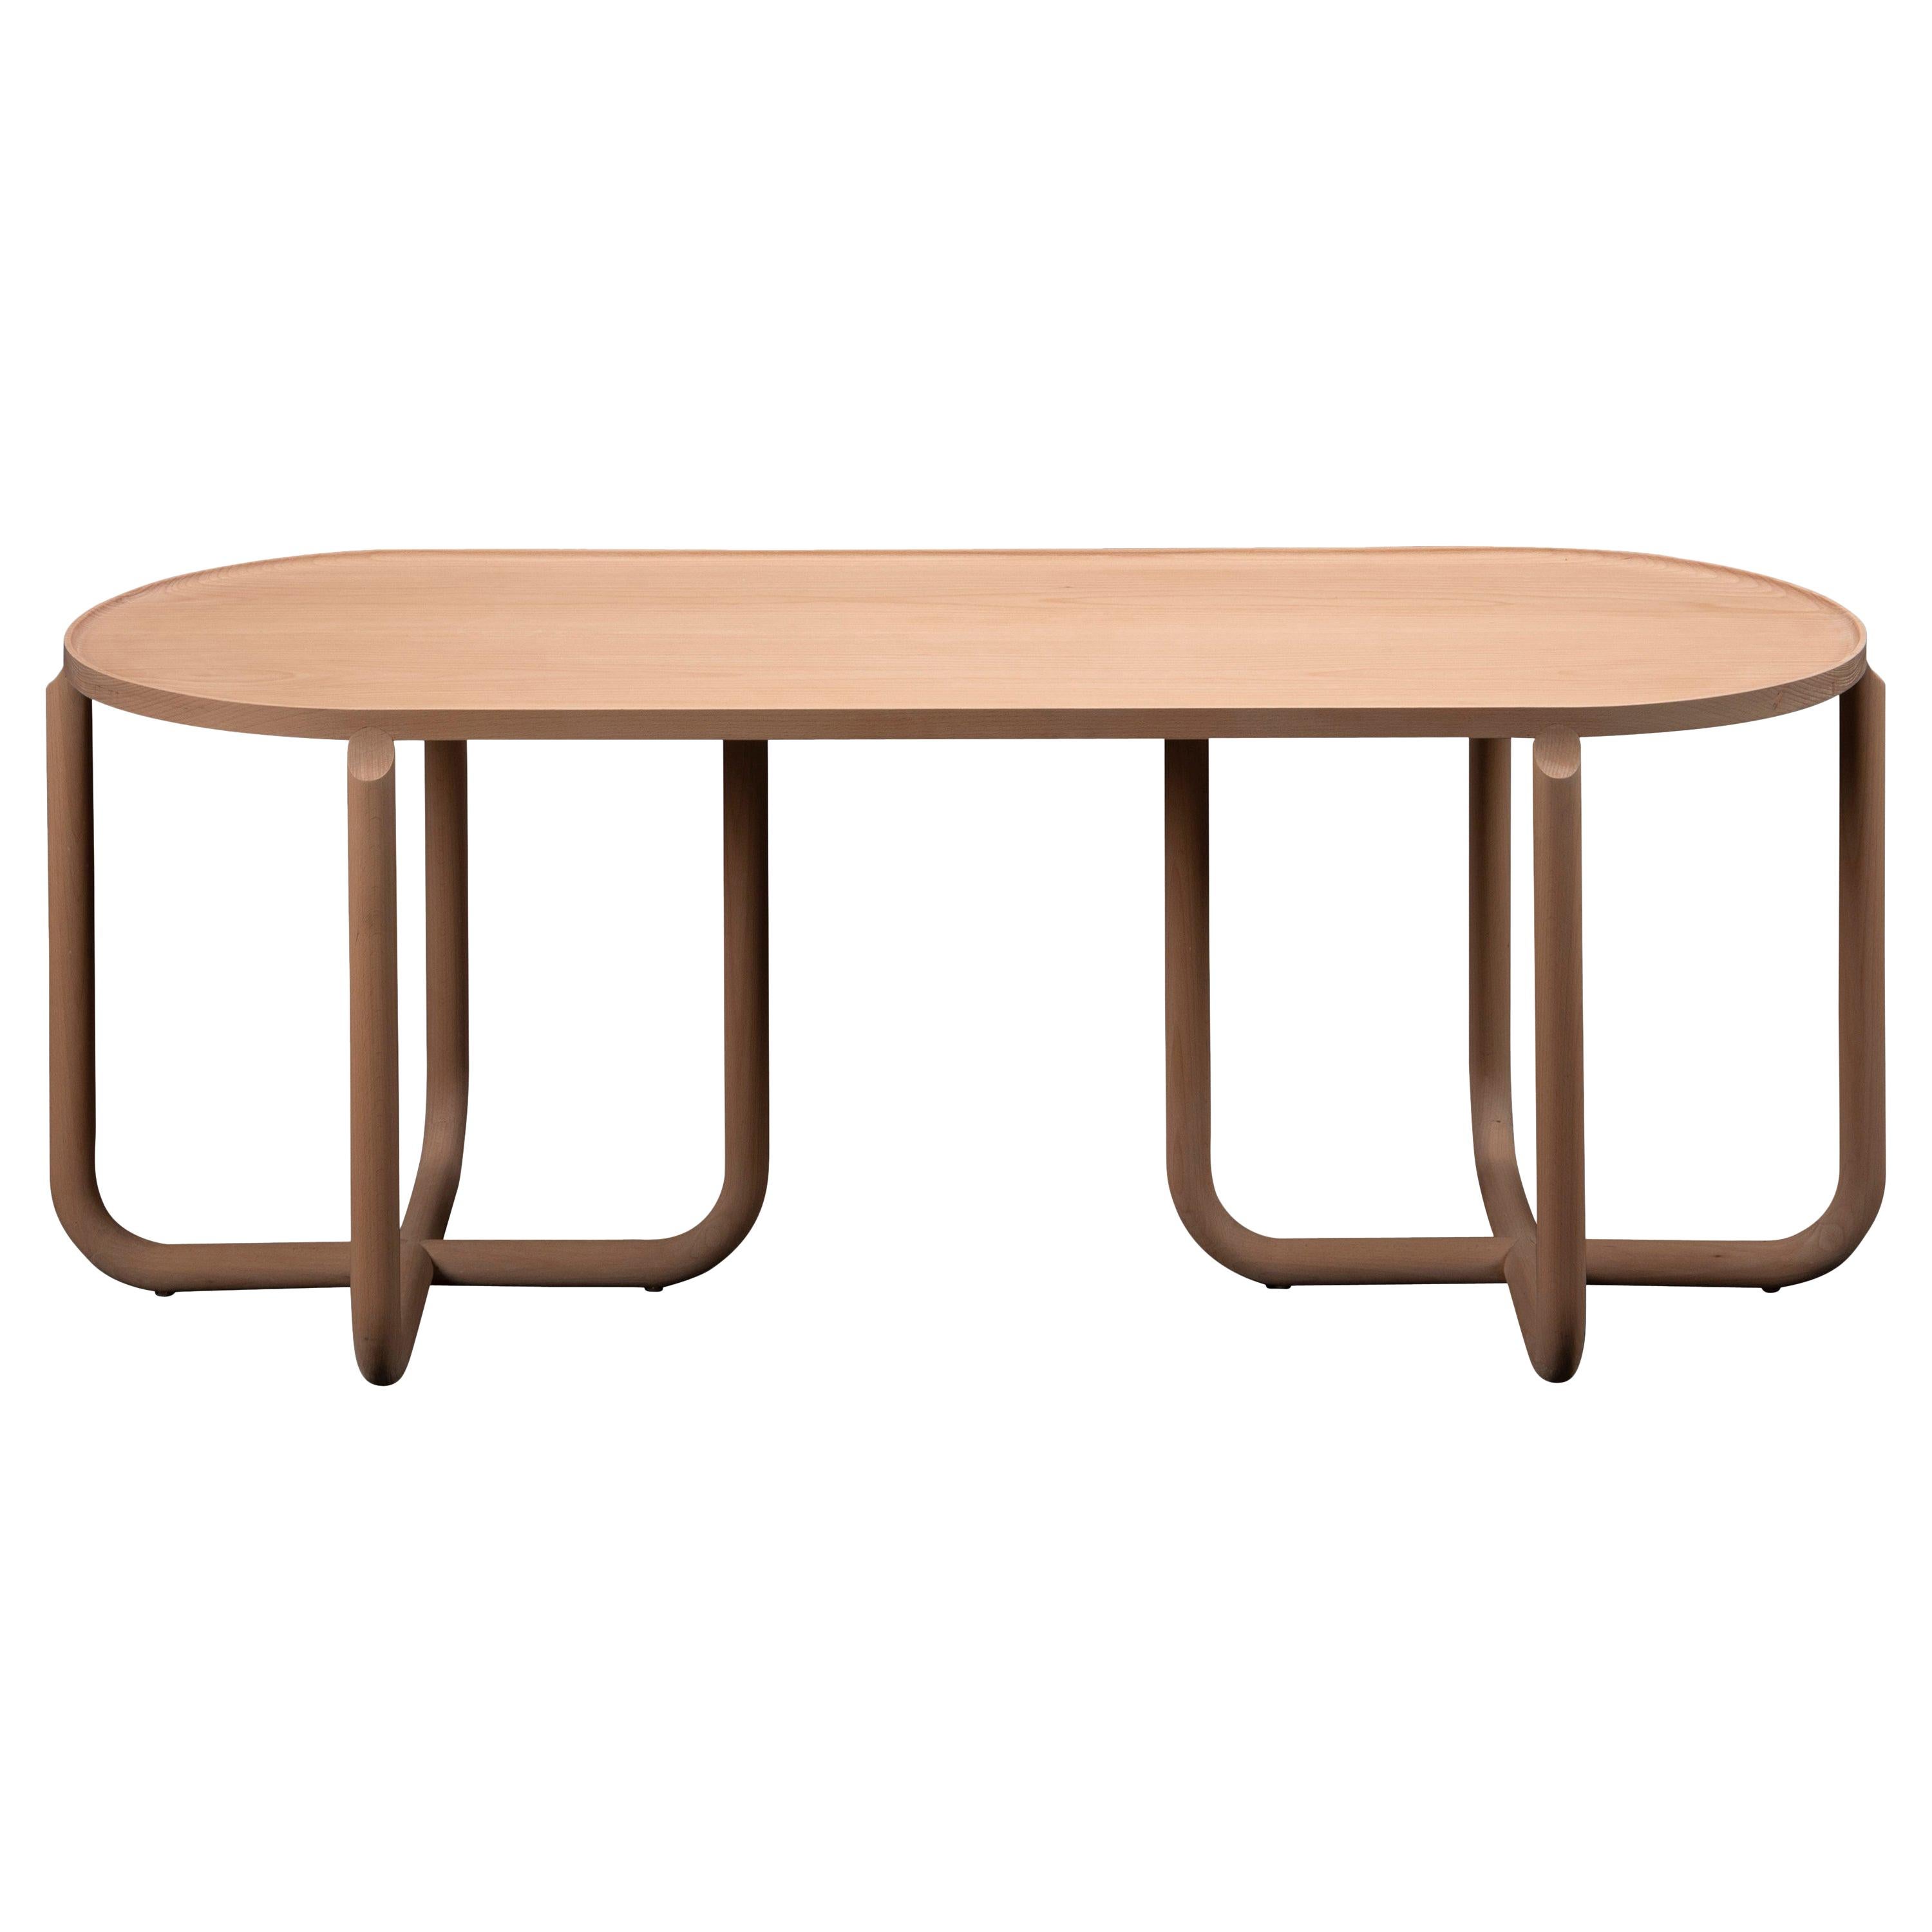 Verso Coffee Table, Beech Wood For Sale